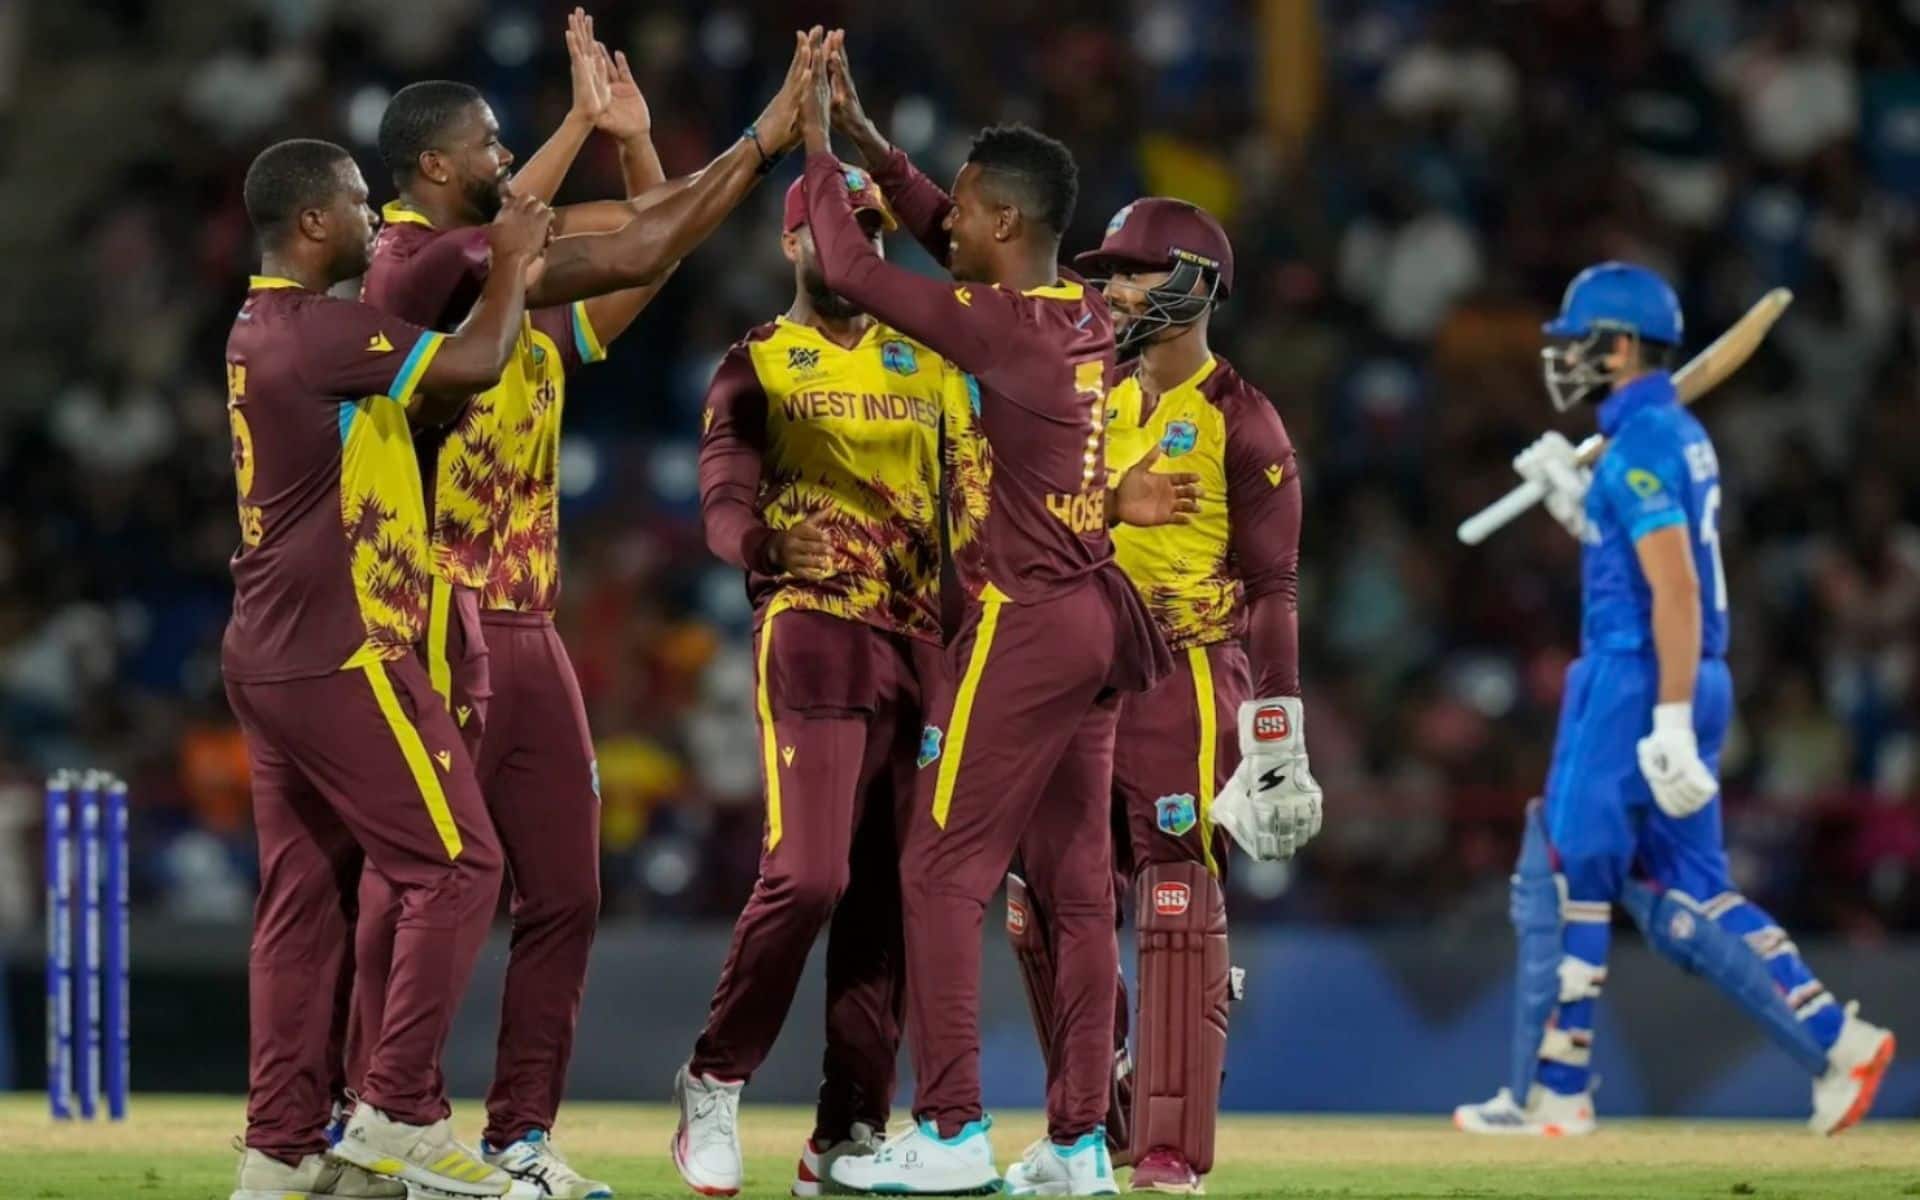 West Indies players celebrating an Afghanistan wicket (AP)